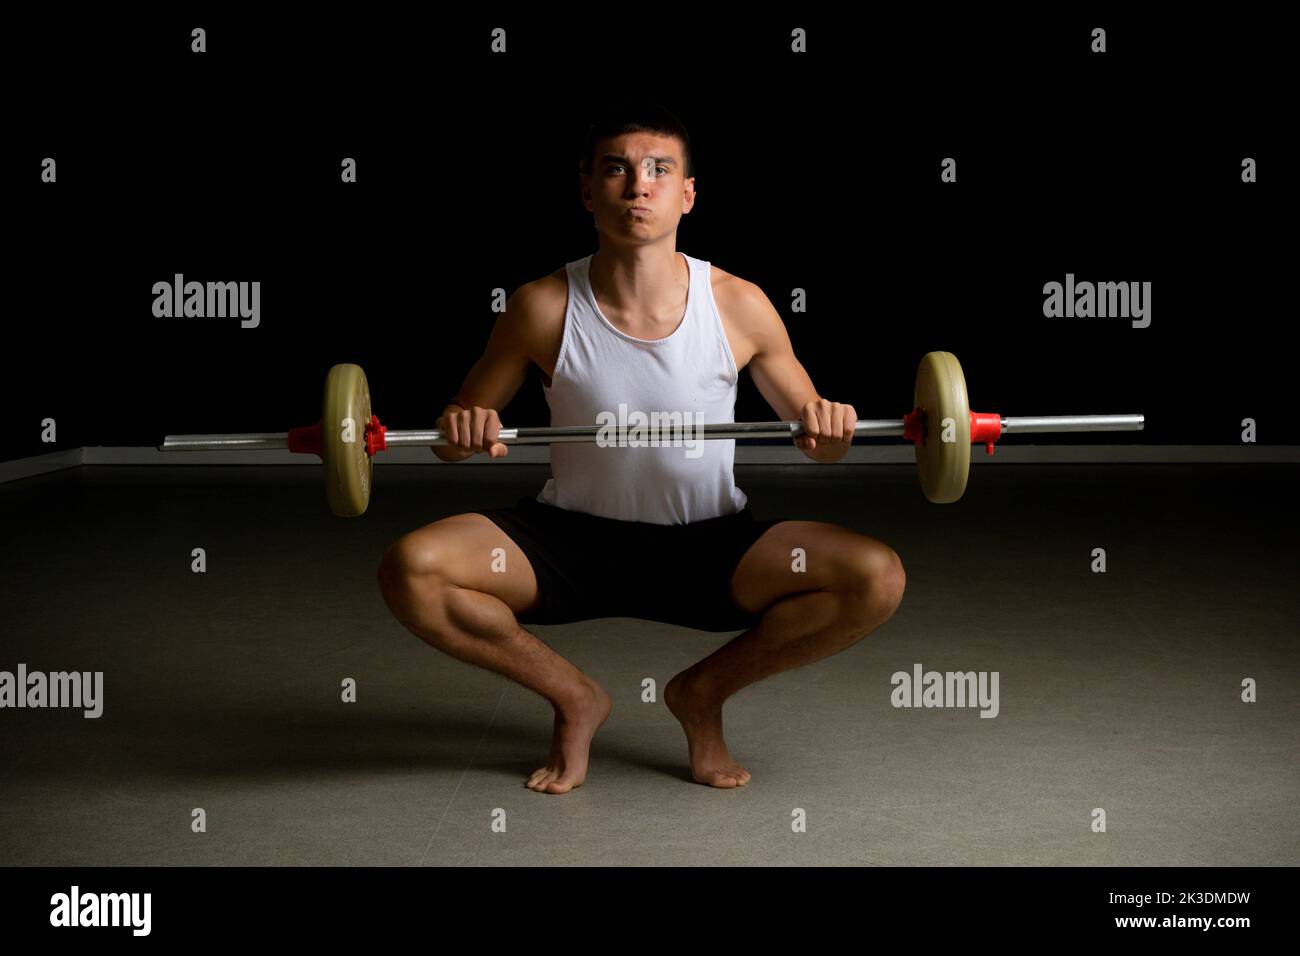 19 year old teenage boy in a tanktop lifting a barbell Stock Photo